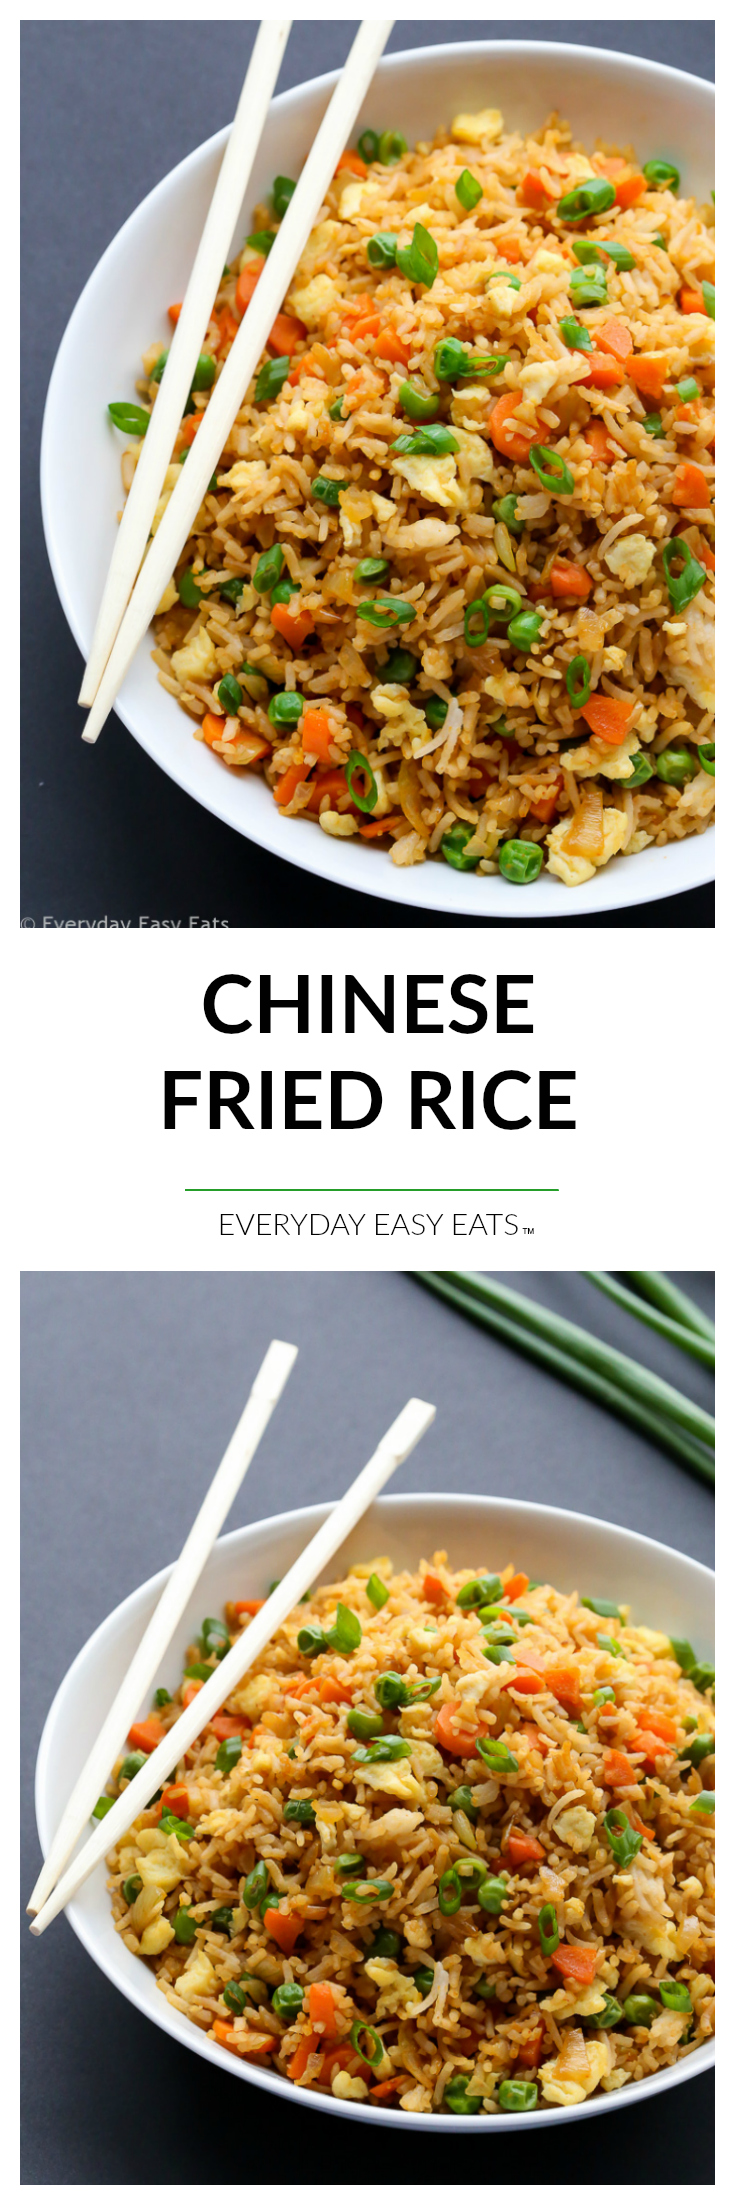 Easy, 15-Minute Chinese Fried Rice Recipe | EverydayEasyEats.com